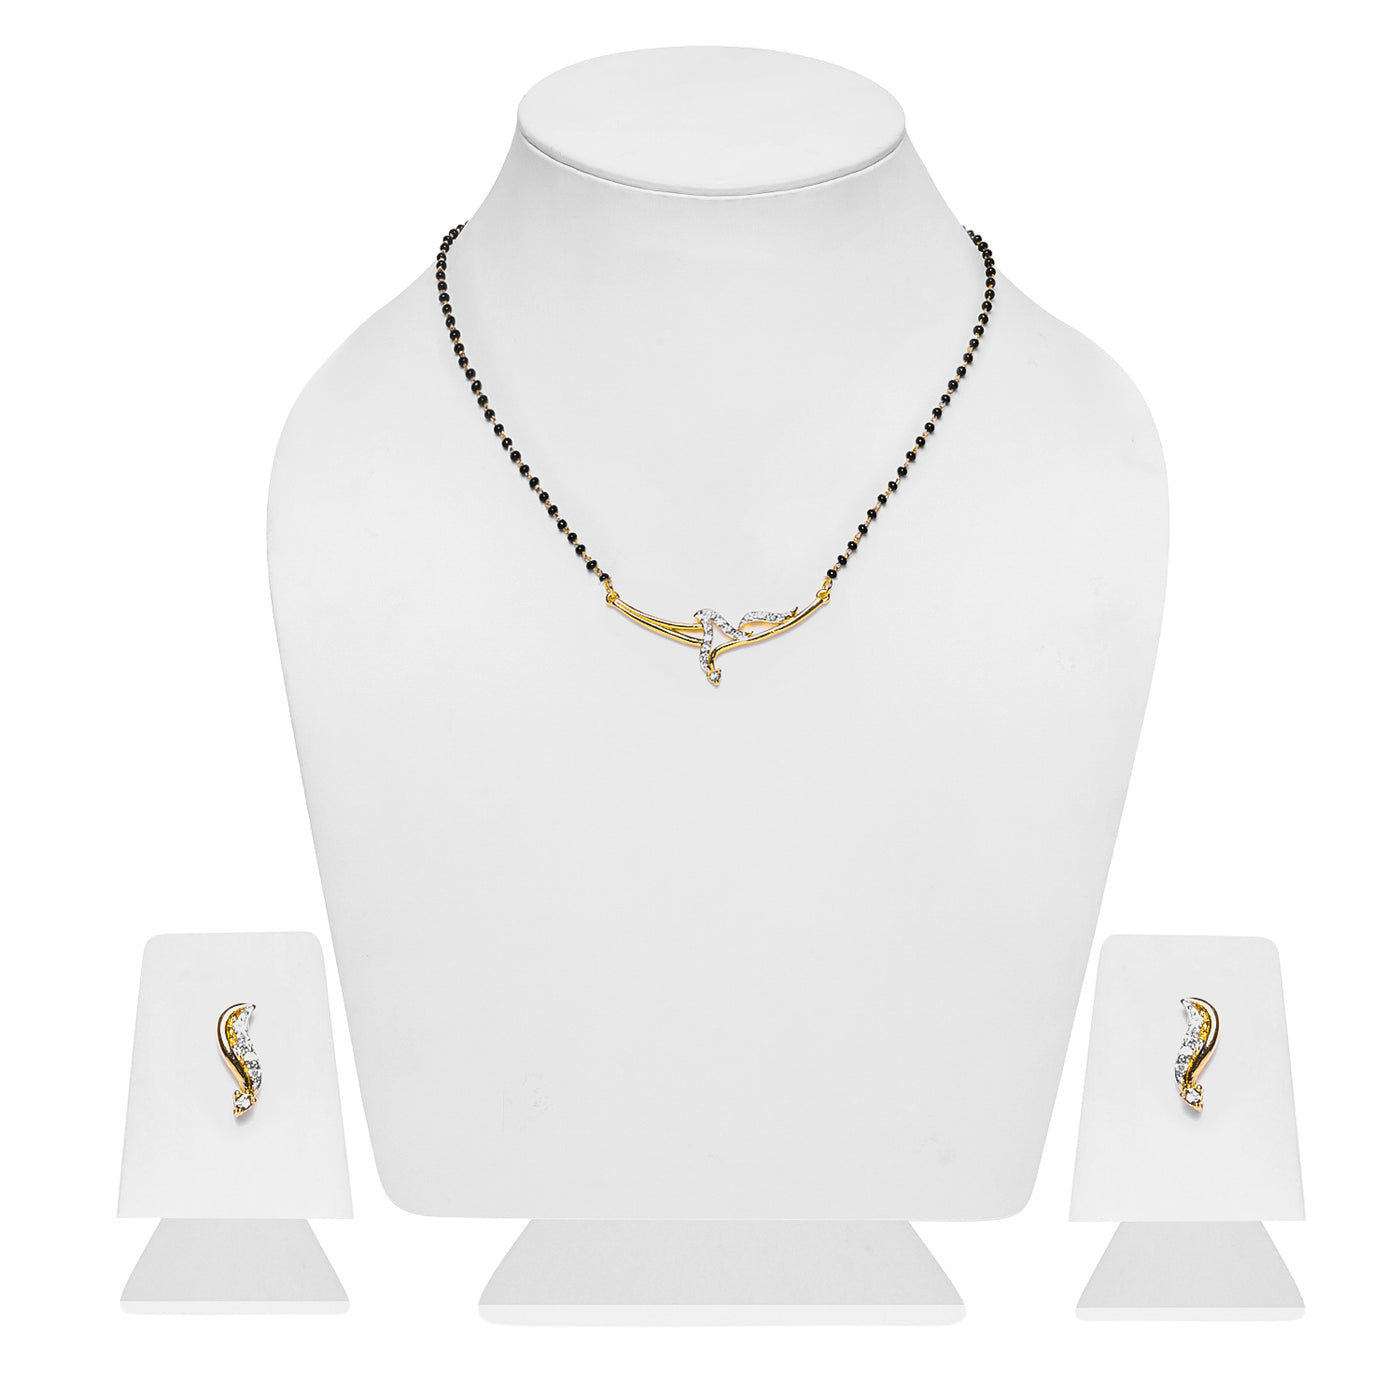 Estele Gold Plated Sophisticated Mangalsutra Necklace Set with Austrian Crystals for Women